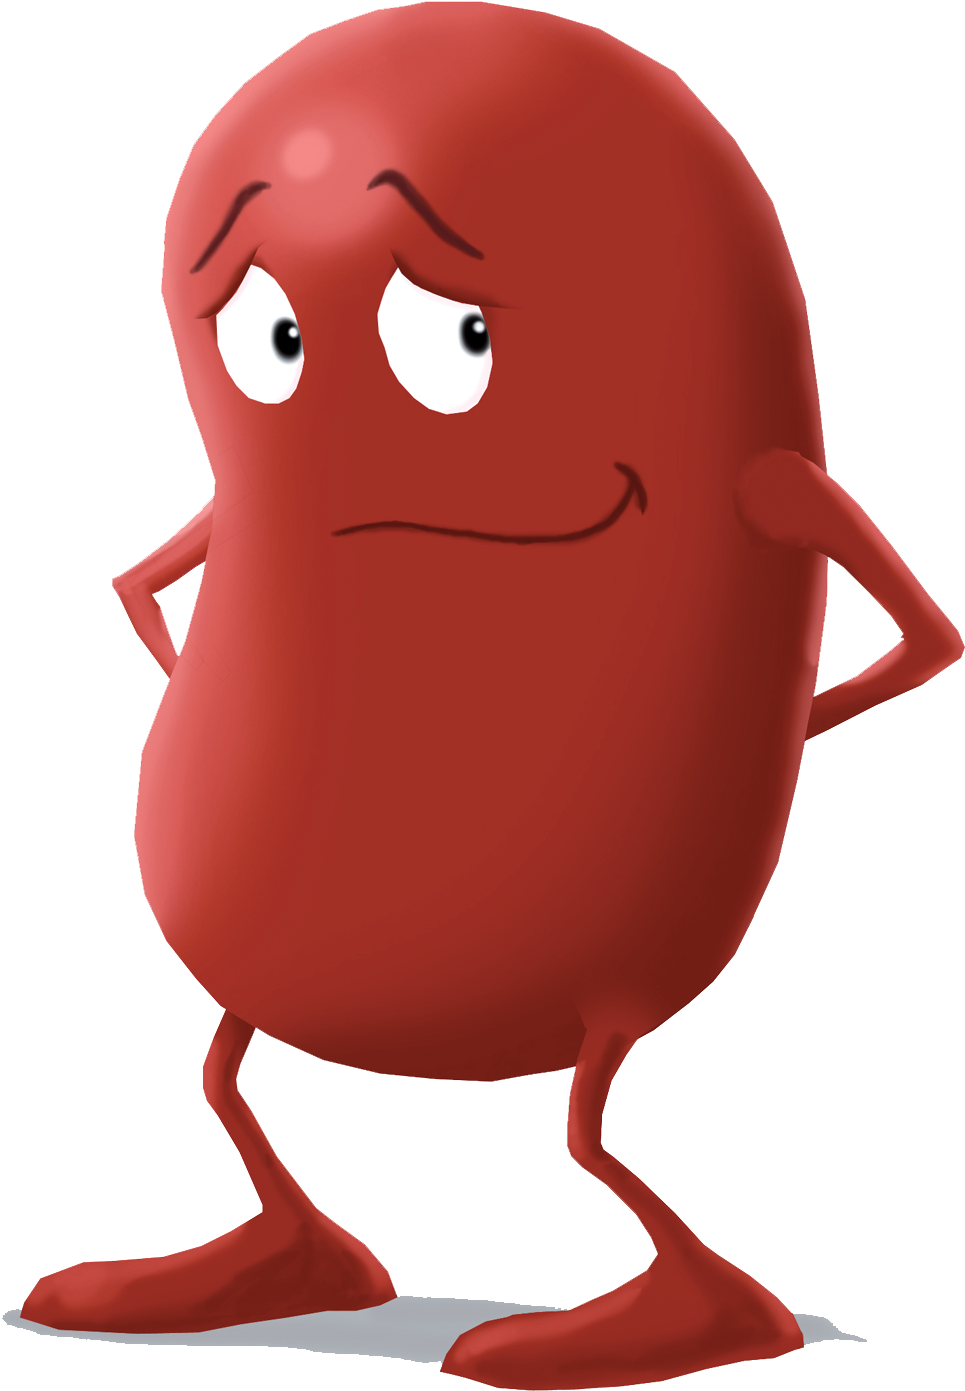 Worried Kidney Character Illustration PNG